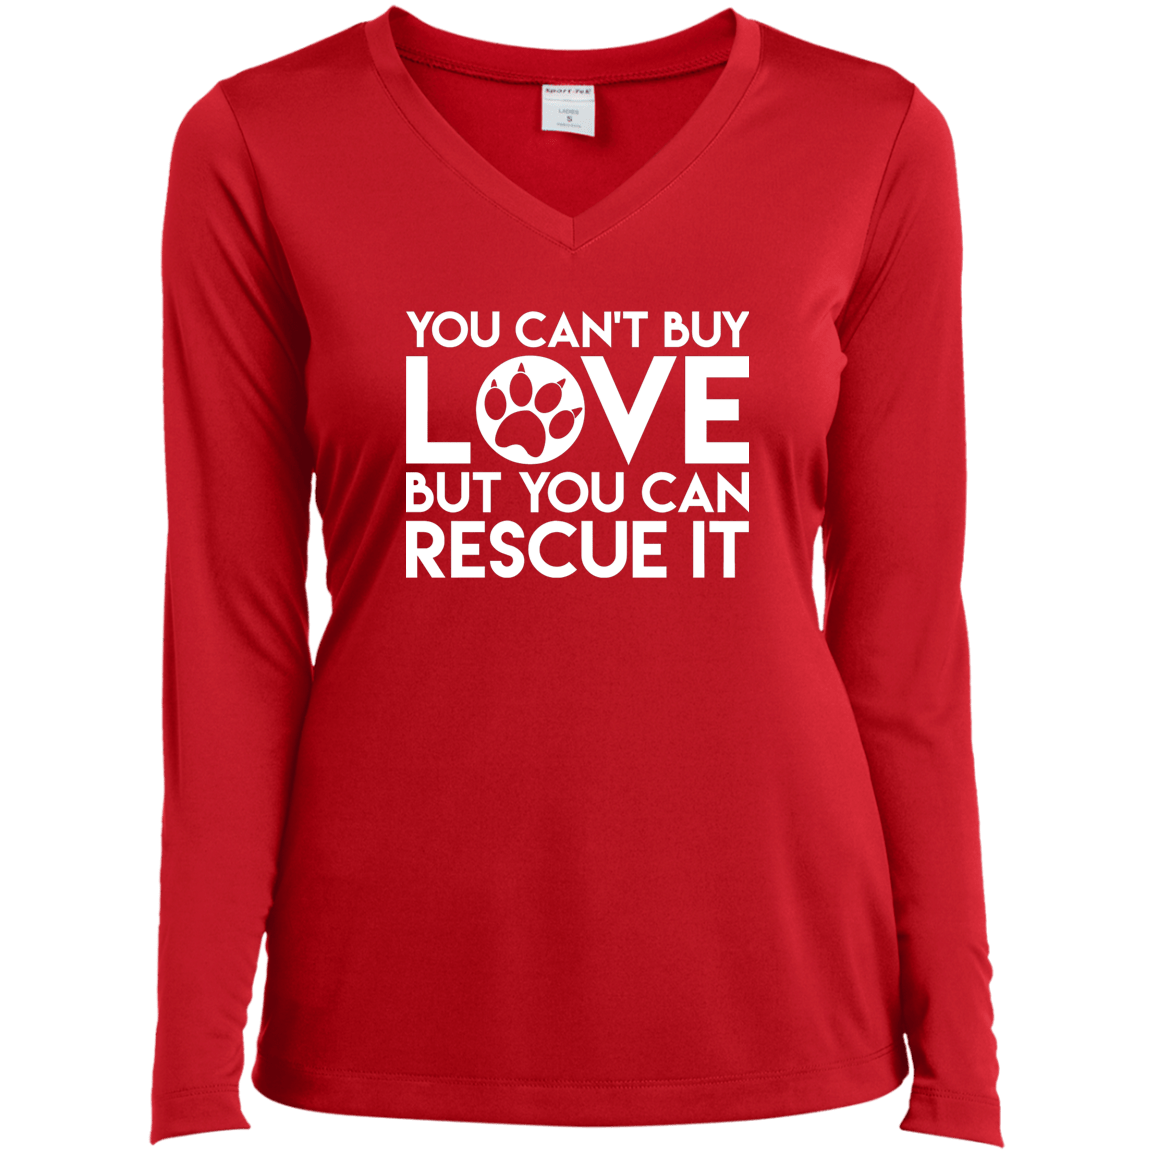 You Cant Buy Love - Long Sleeve Ladies V Neck.